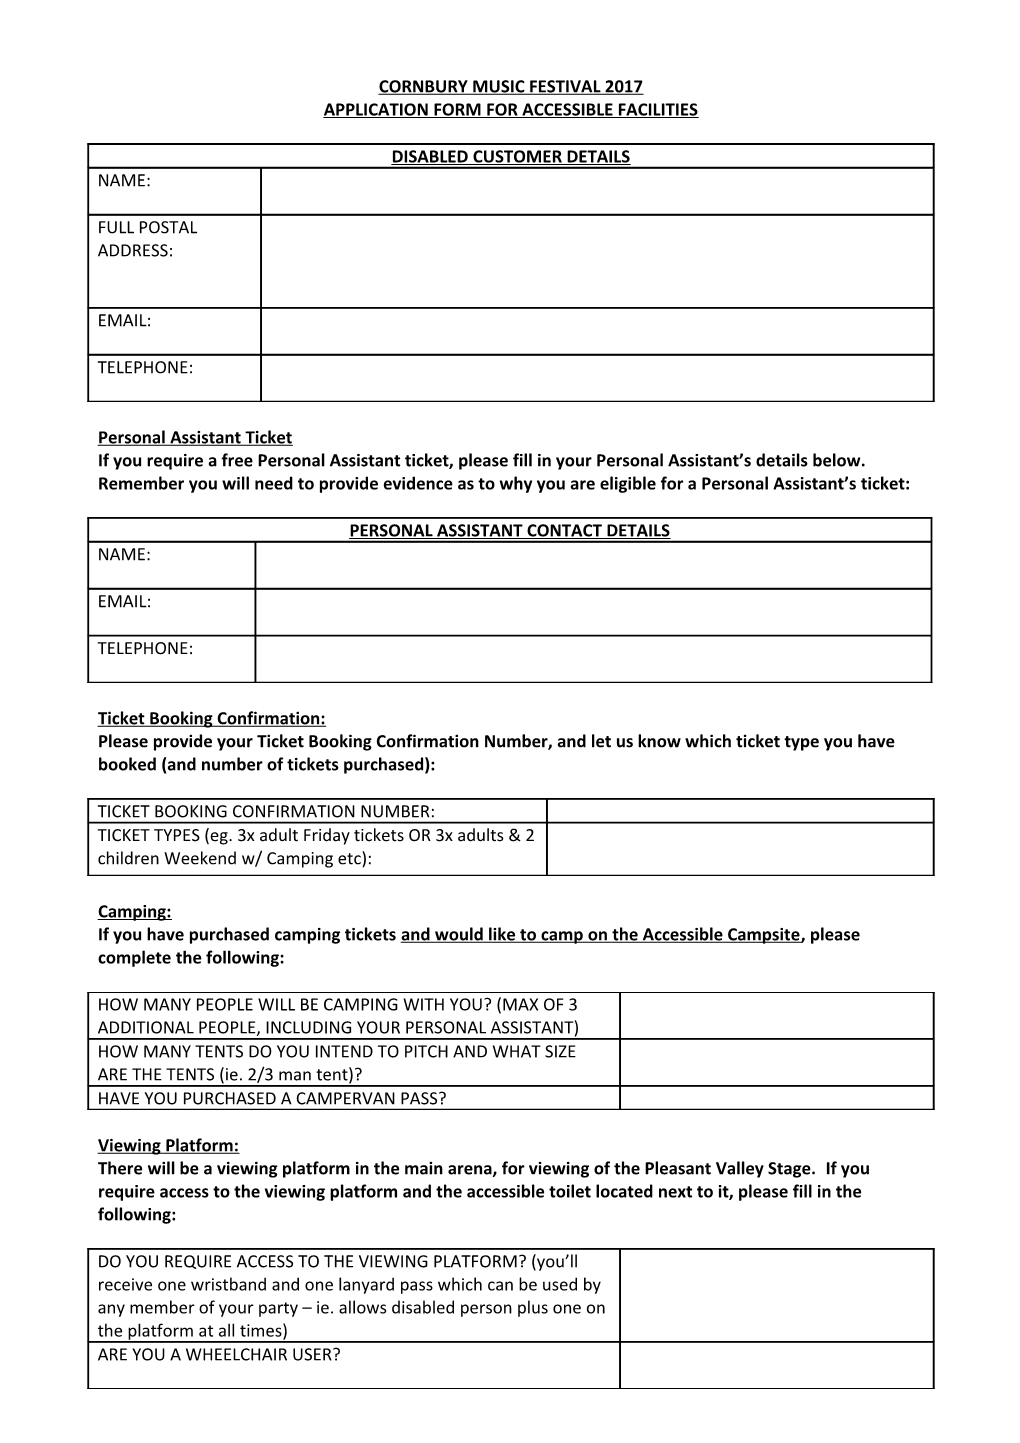 Application Form for Accessible Facilities